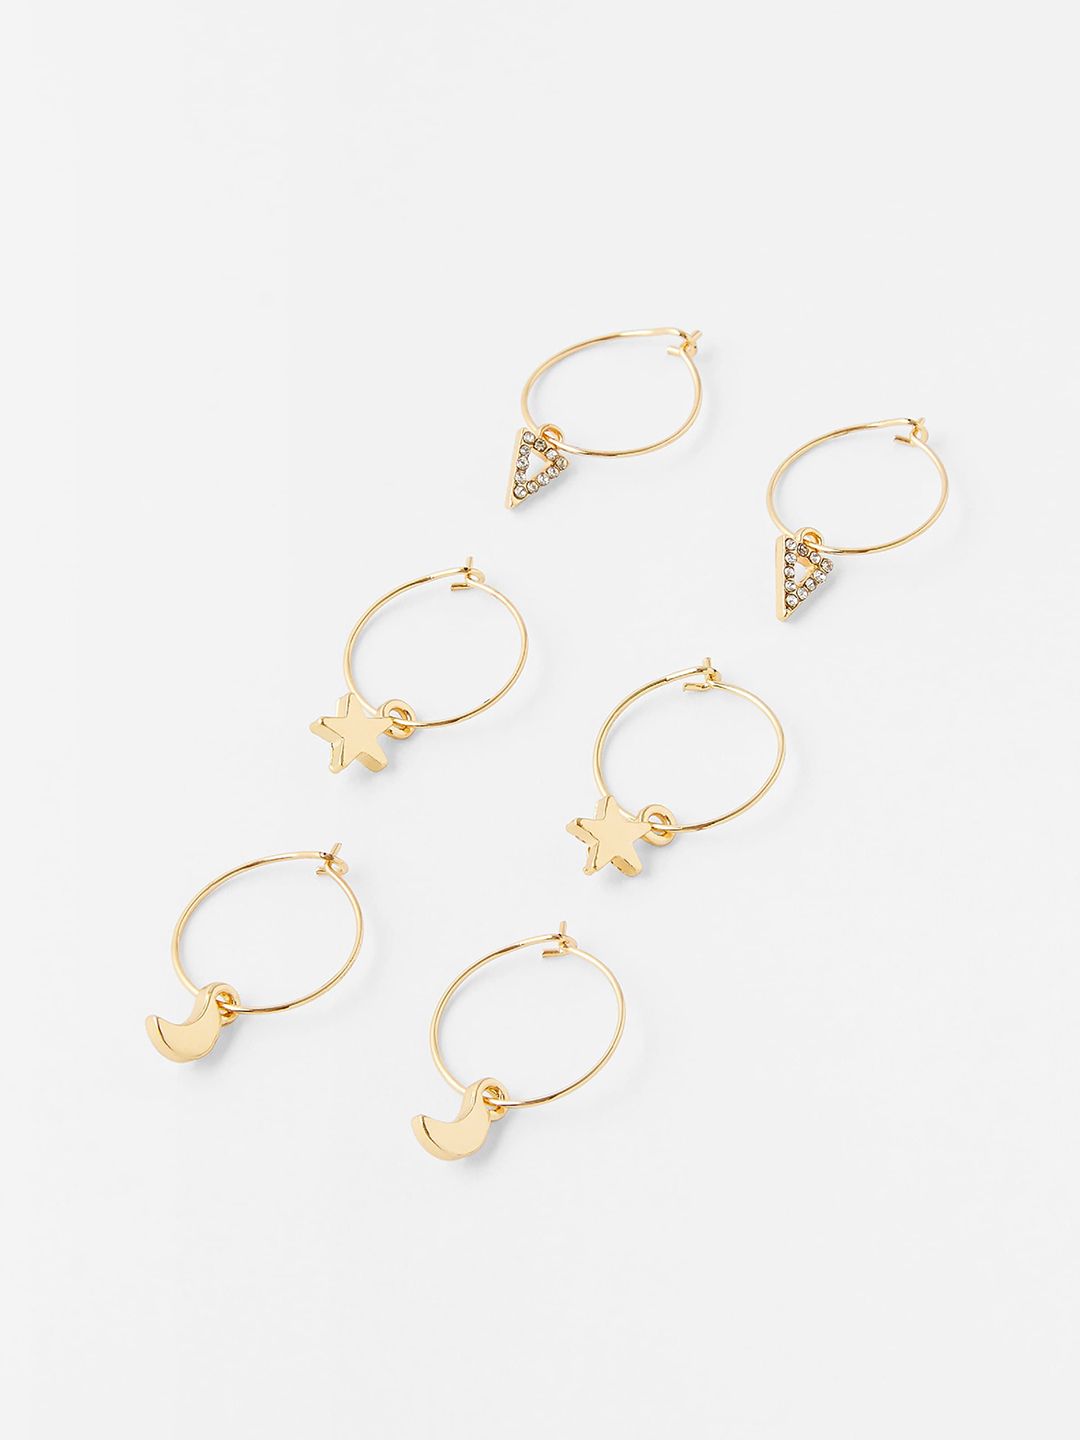 Accessorize Pack Of 3 Gold-Toned Contemporary Hoop Earrings Price in India